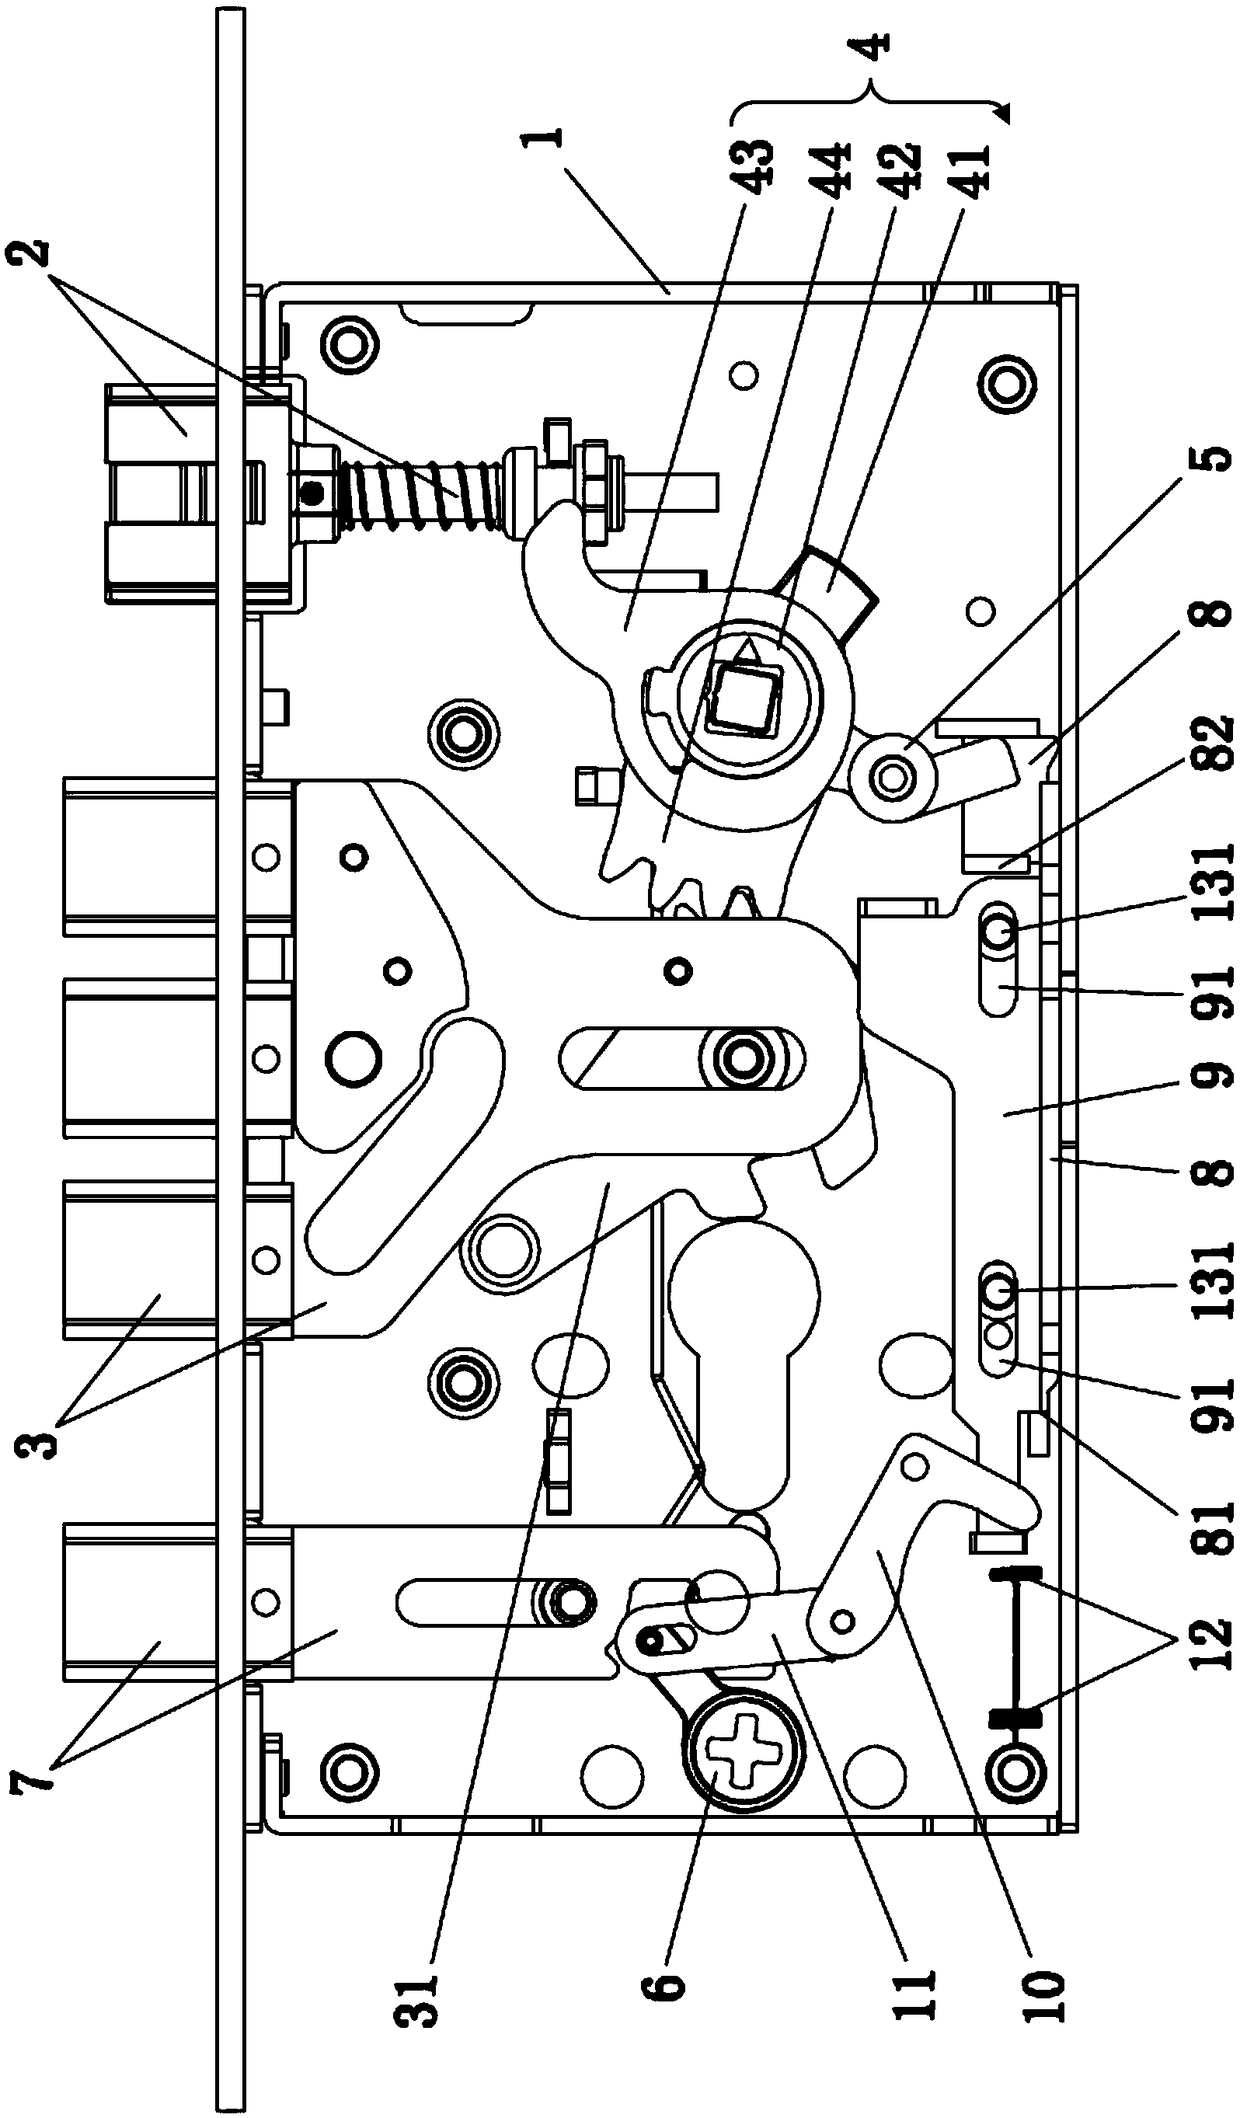 Mortise lock body with escaping function